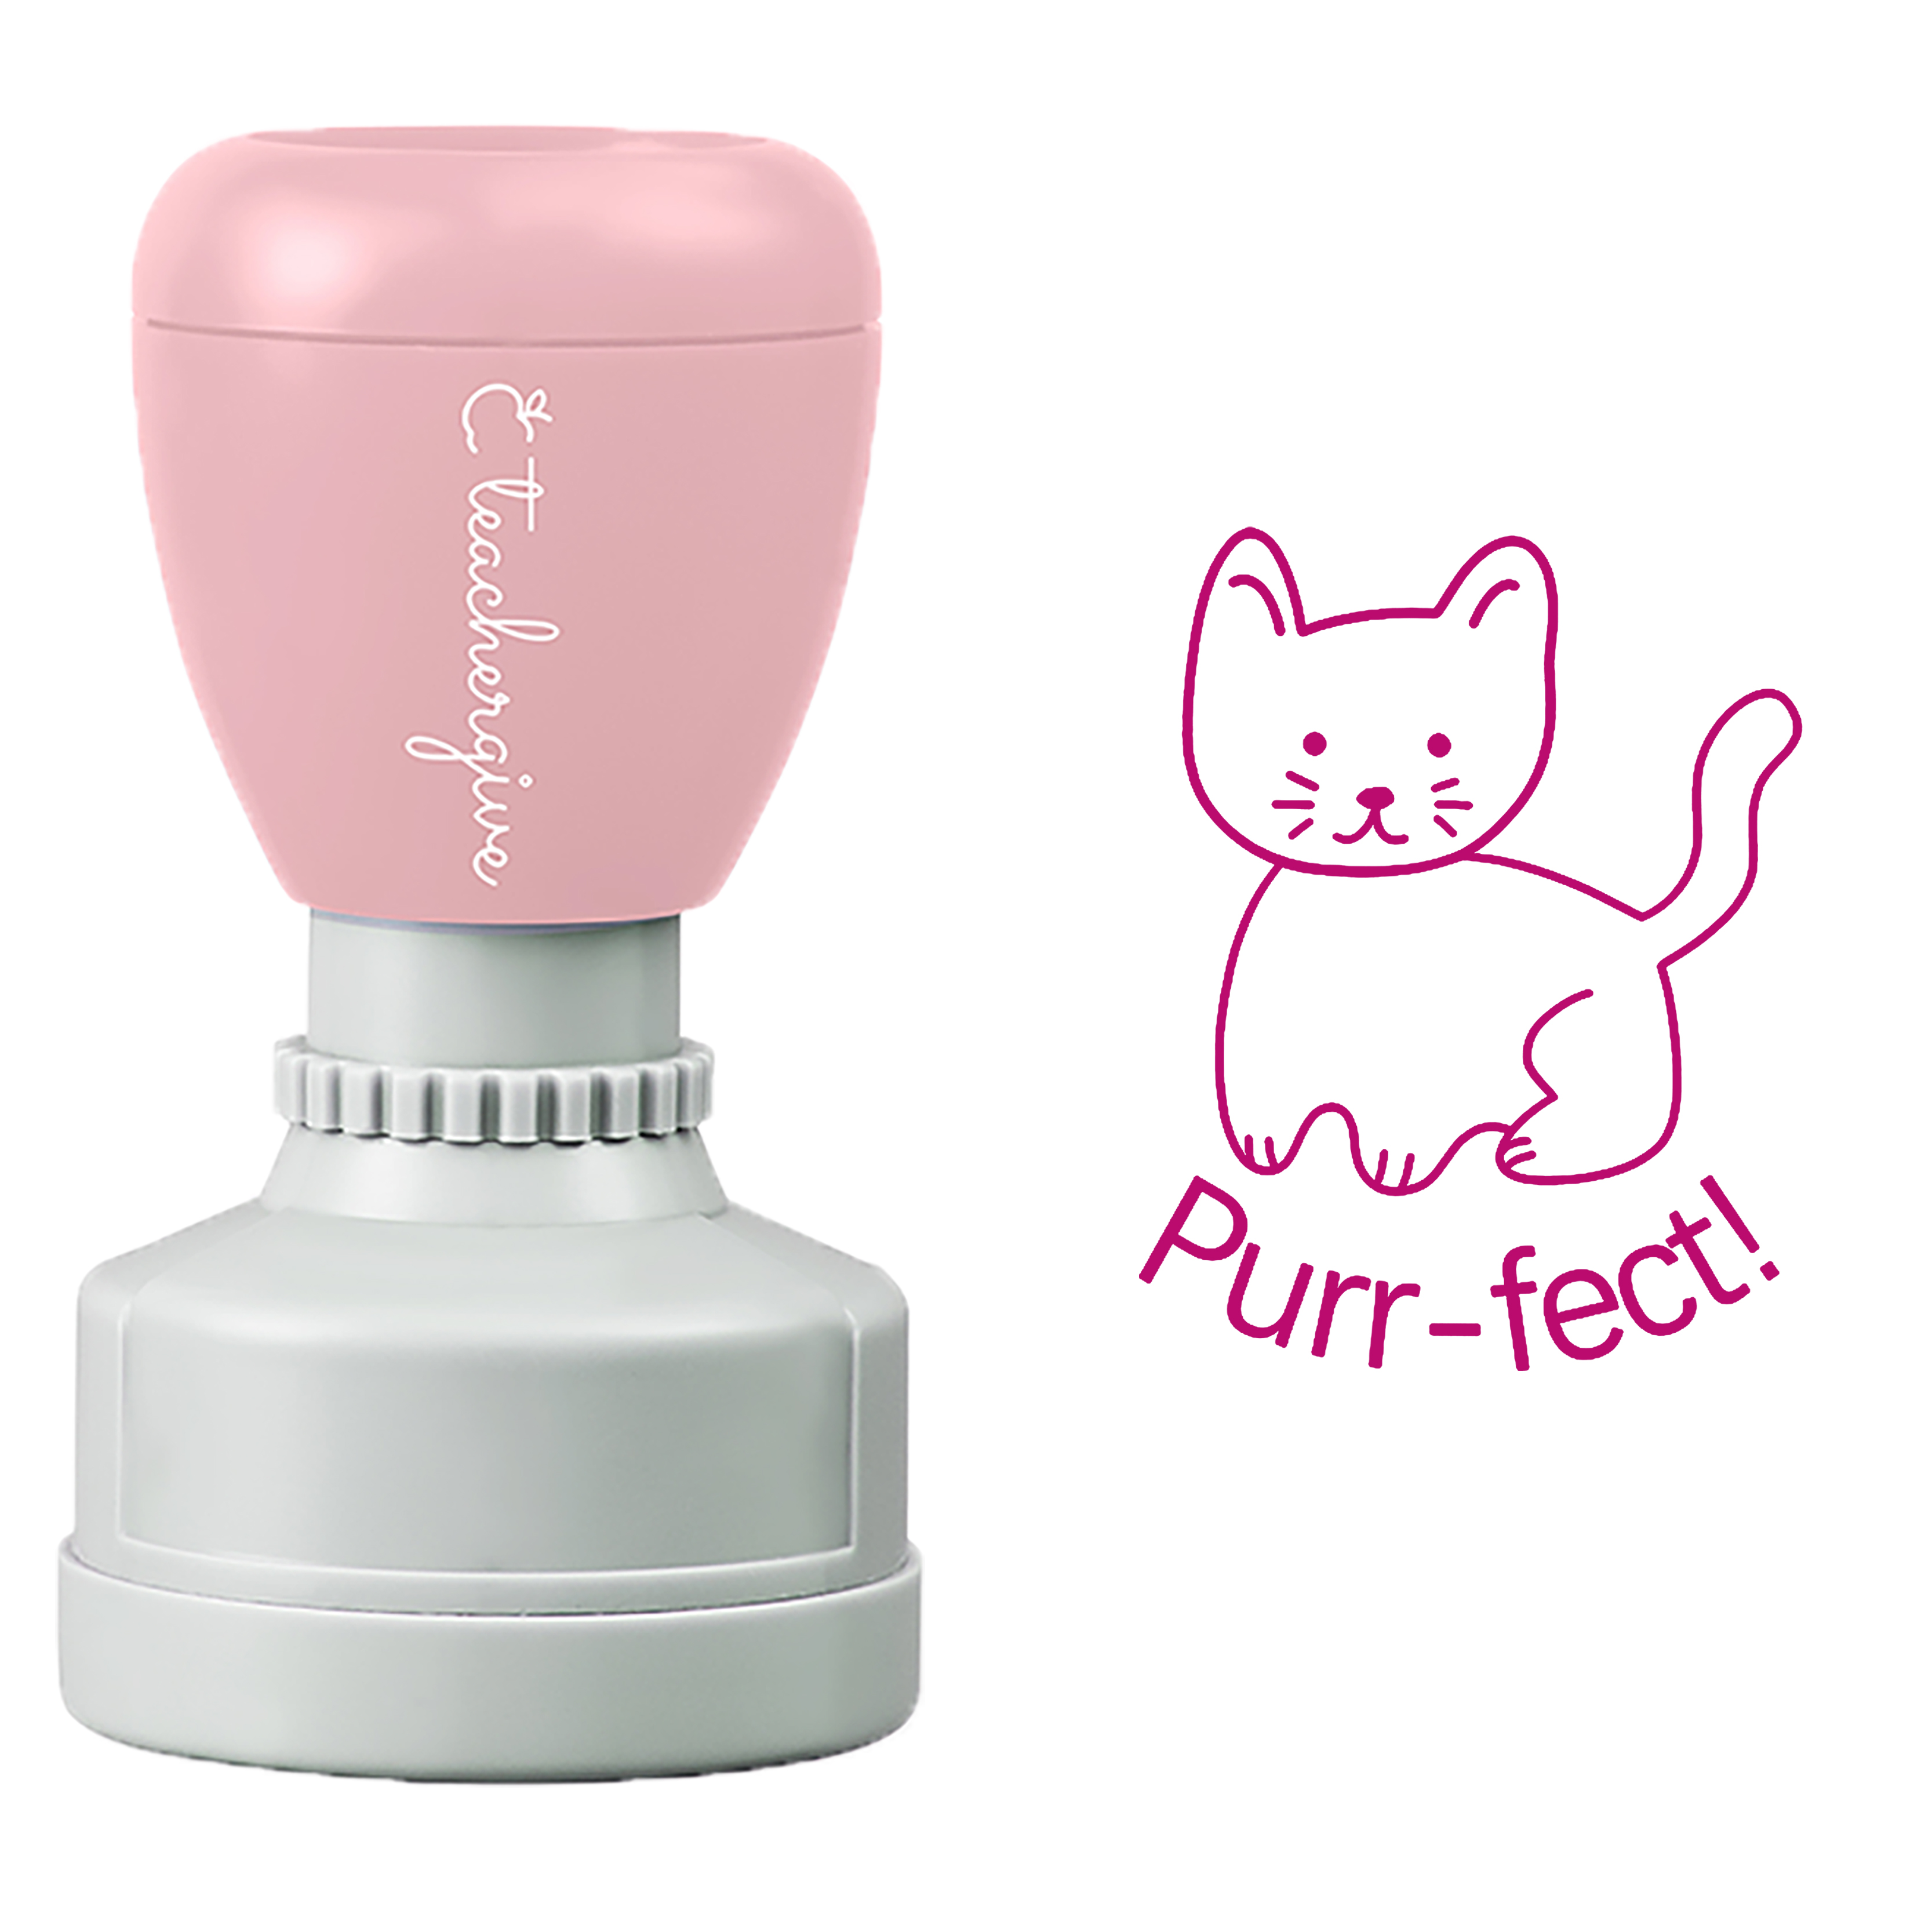 Purr-fect Stamp